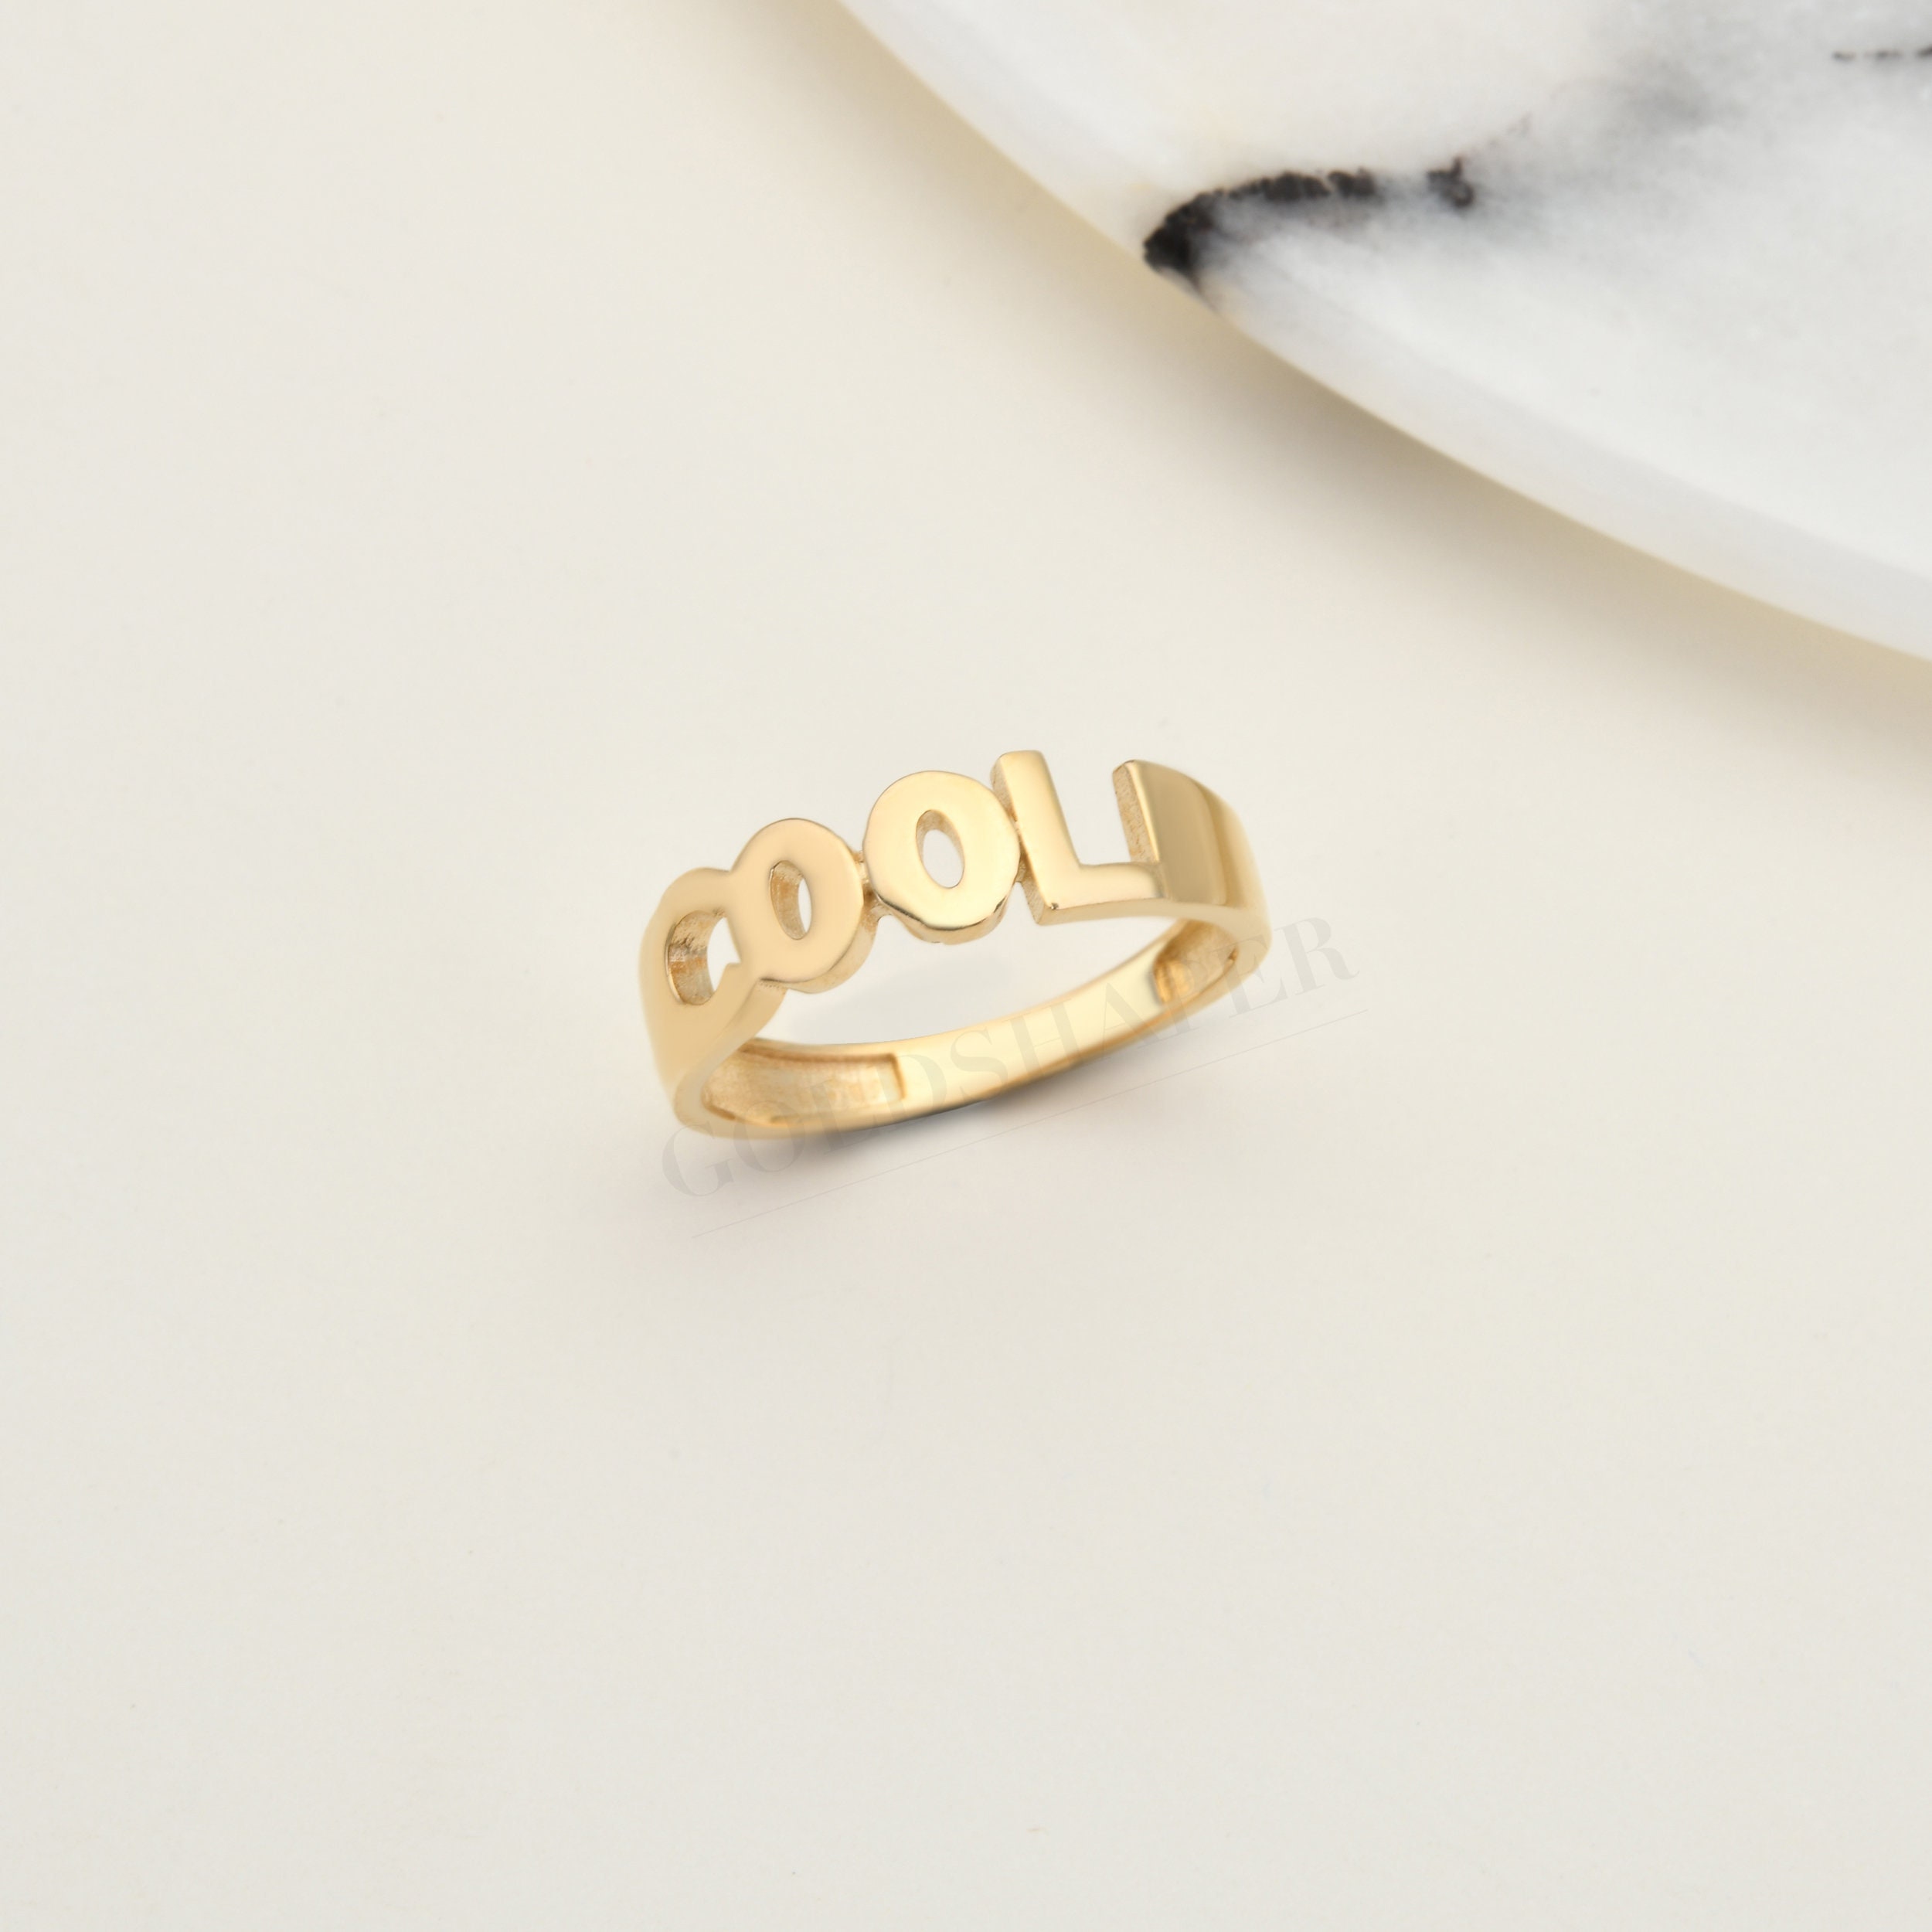 Cool Ring, 14K Solid Gold, Name Letter Birthday Gift, Christmas Valentine's Day Gift